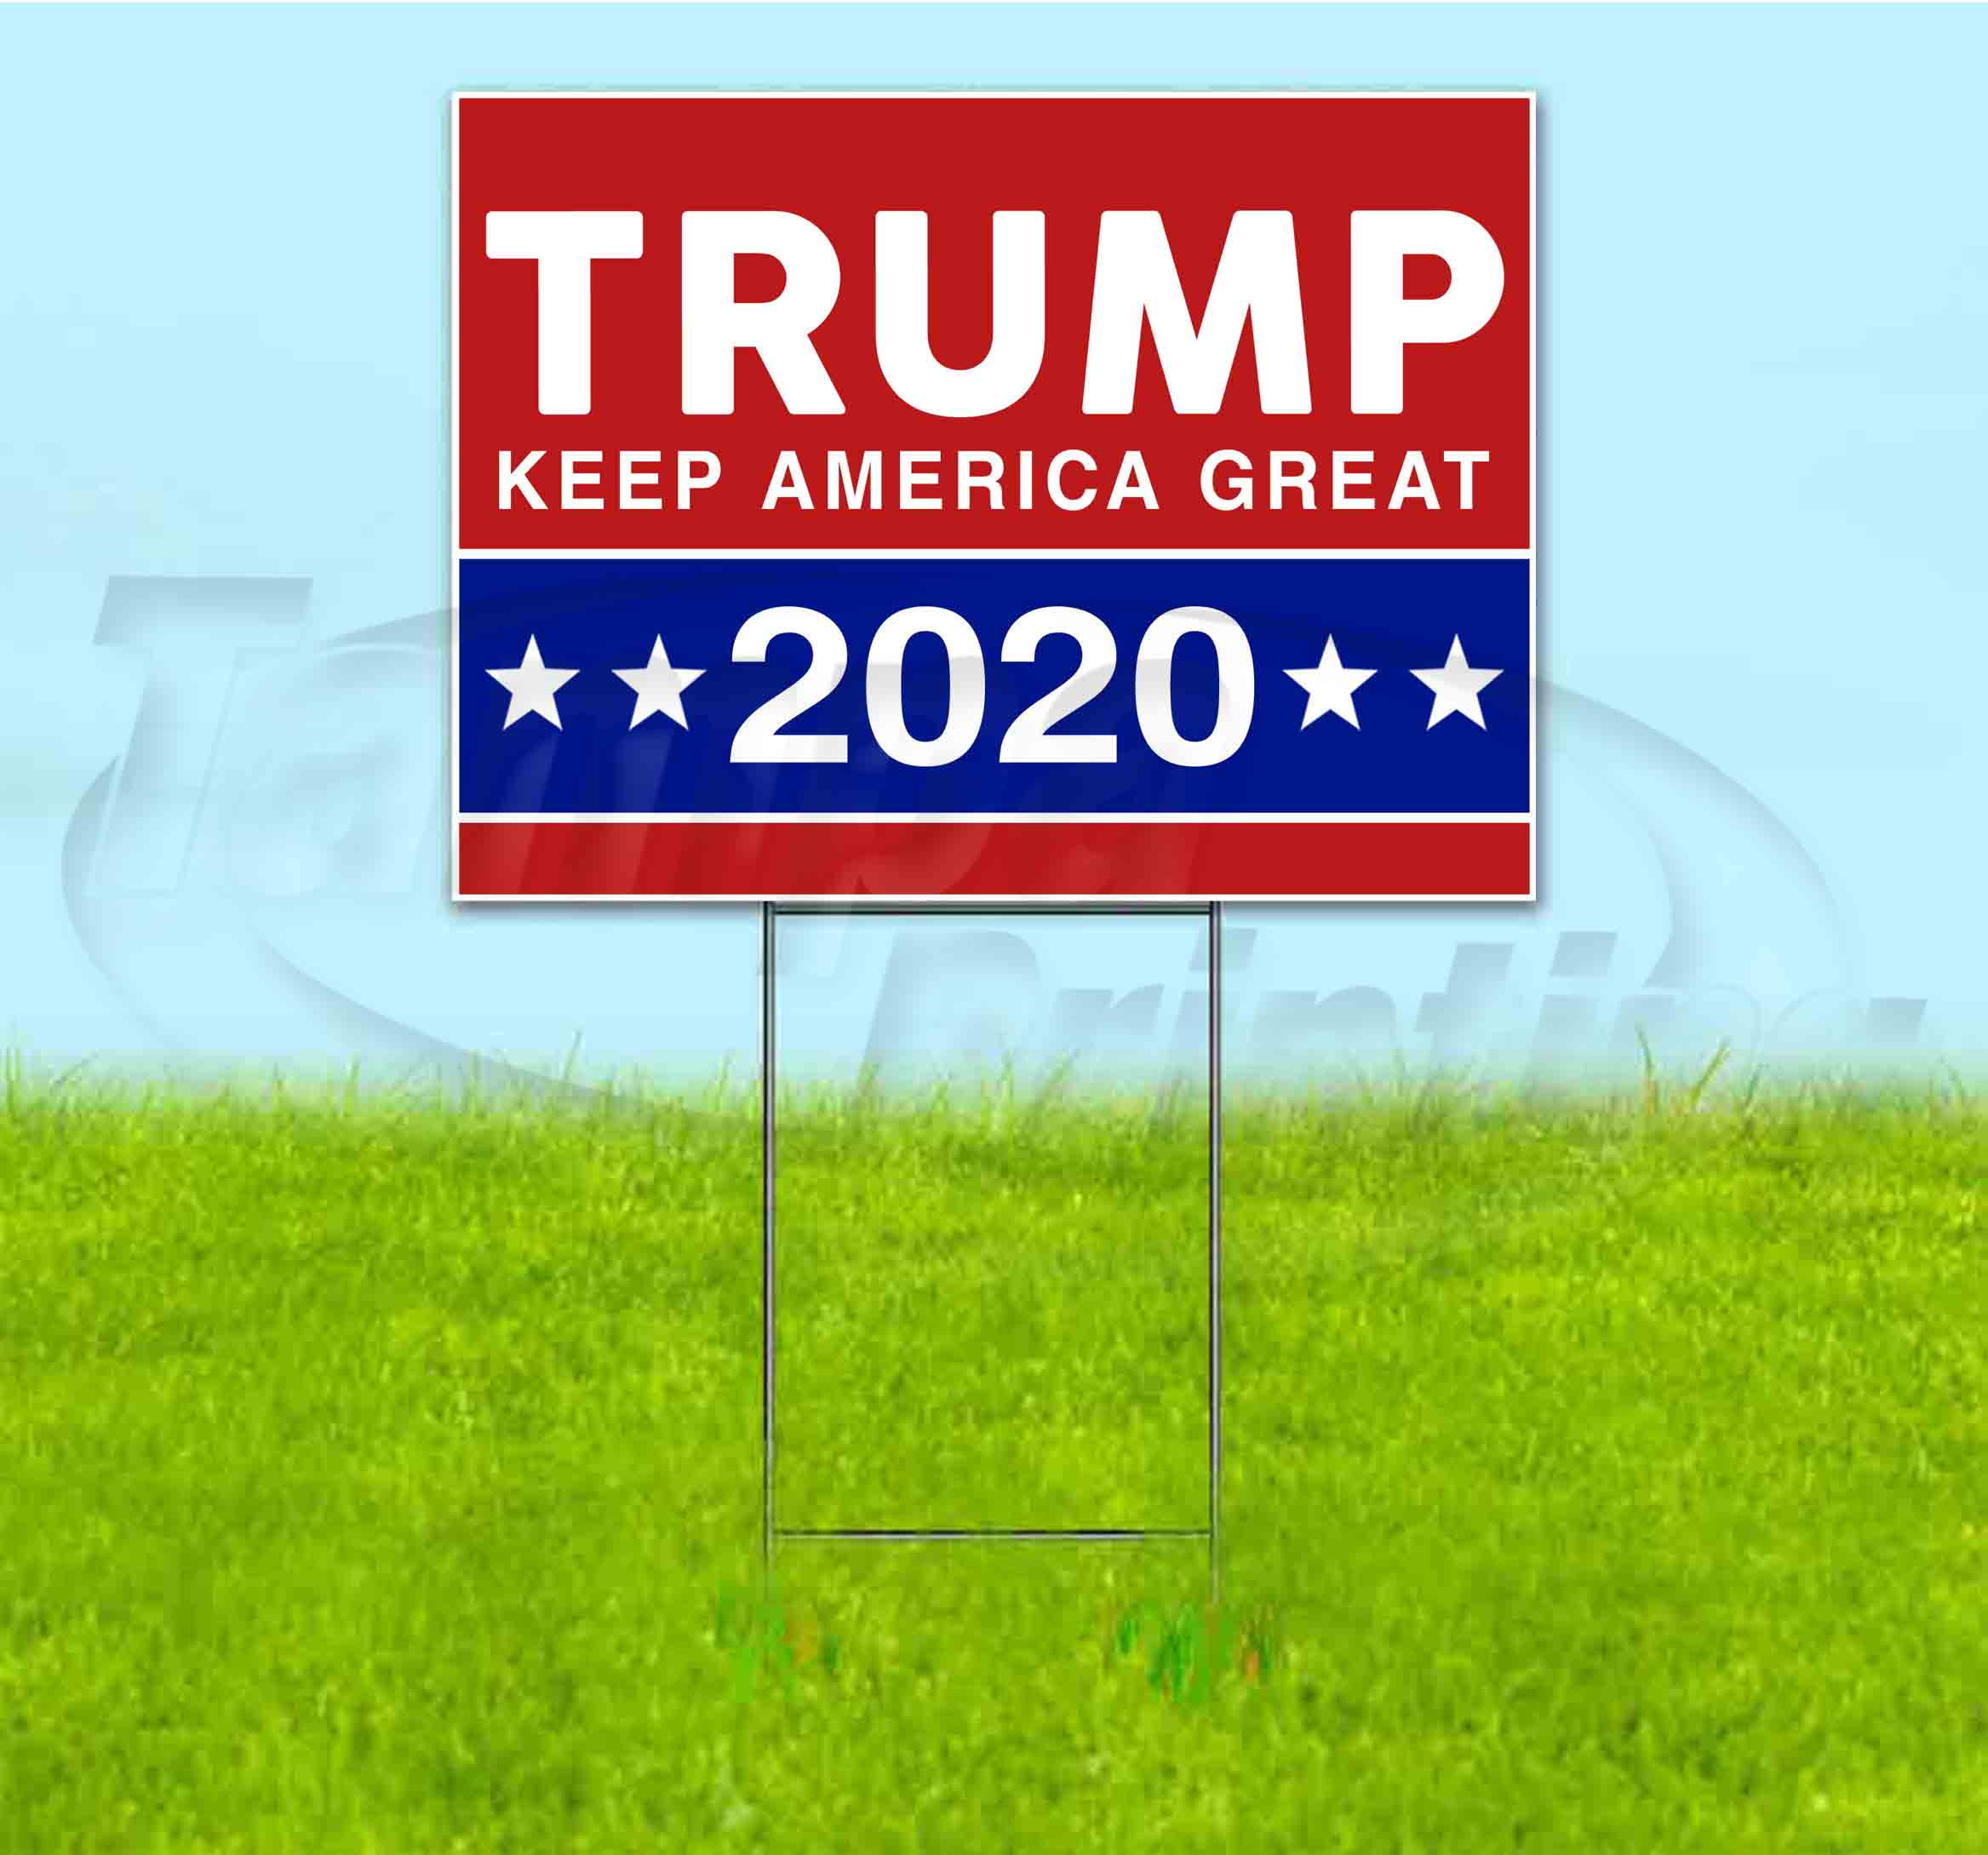 DONALD TRUMP 2020 PENCE KEEP AMERICA GREAT YARD SIGN 18"x12" FREE STAKE 2 SIDED 